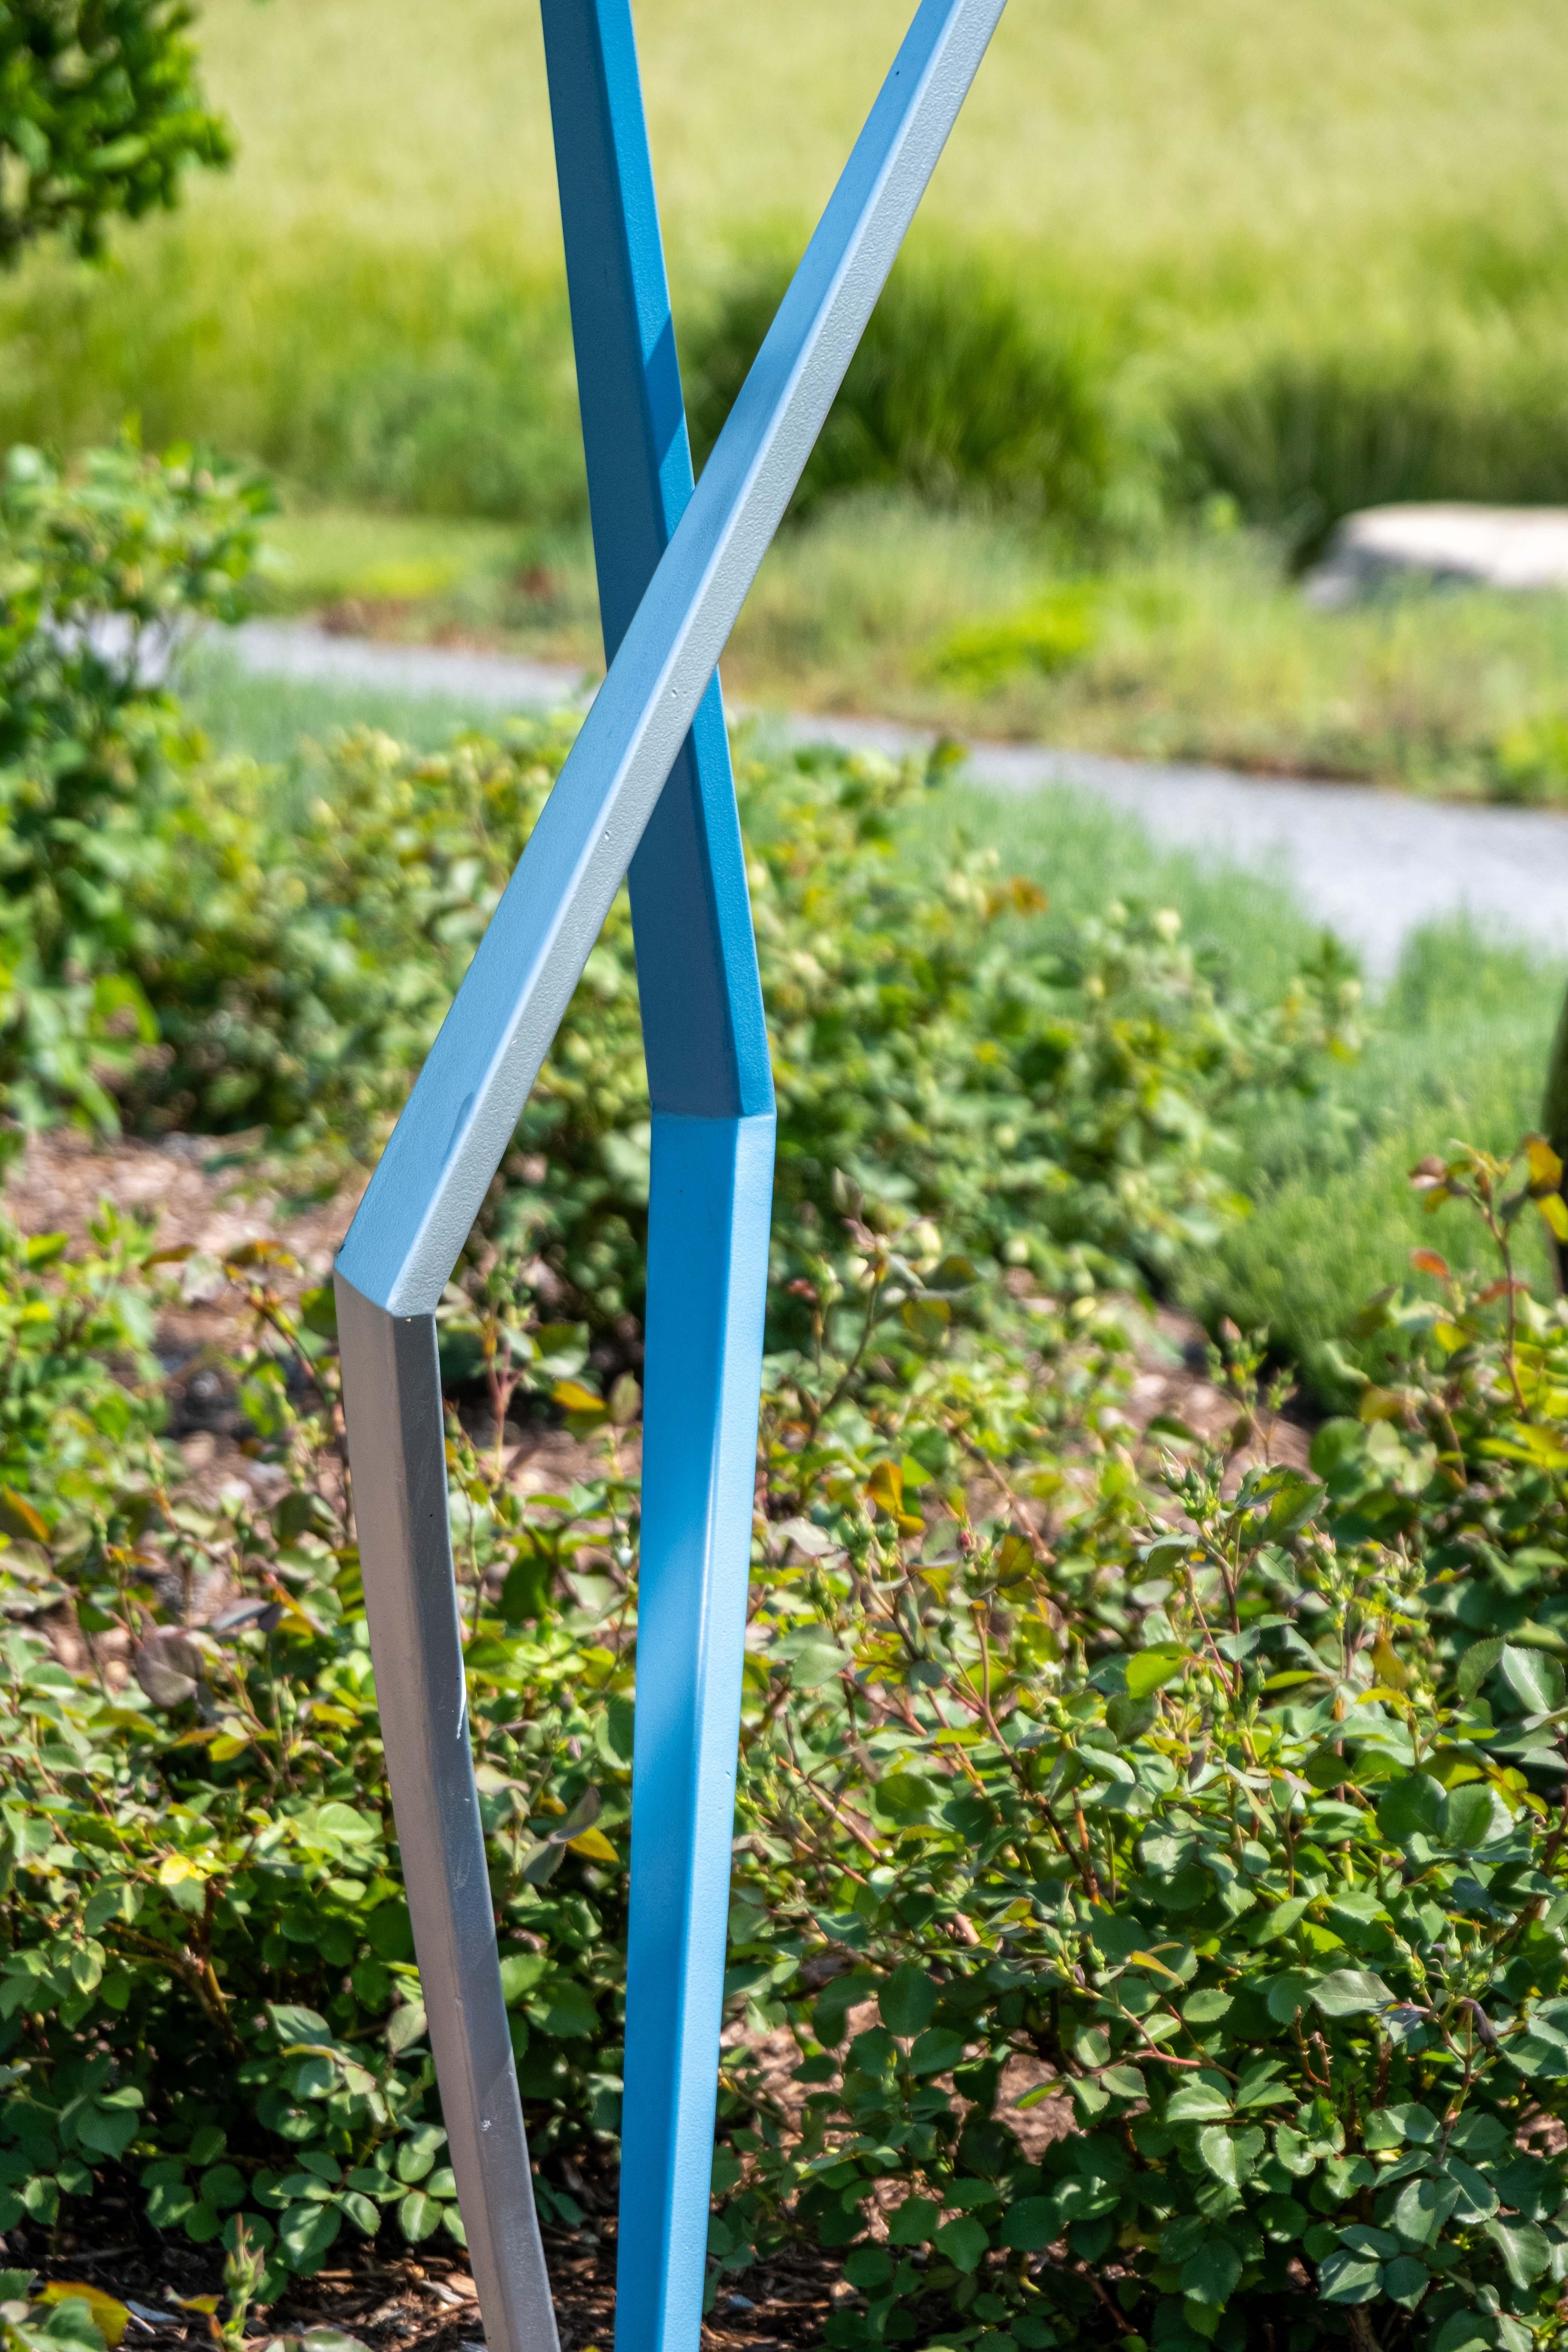 Bold, clean lines and vivid colours attract the viewer’s eye to this minimalist sculpture by Robert Clarke-Ellis. The Toronto artist creates expressive pieces forged out of steel. The stick-like figures in bright red and yellow suggest an